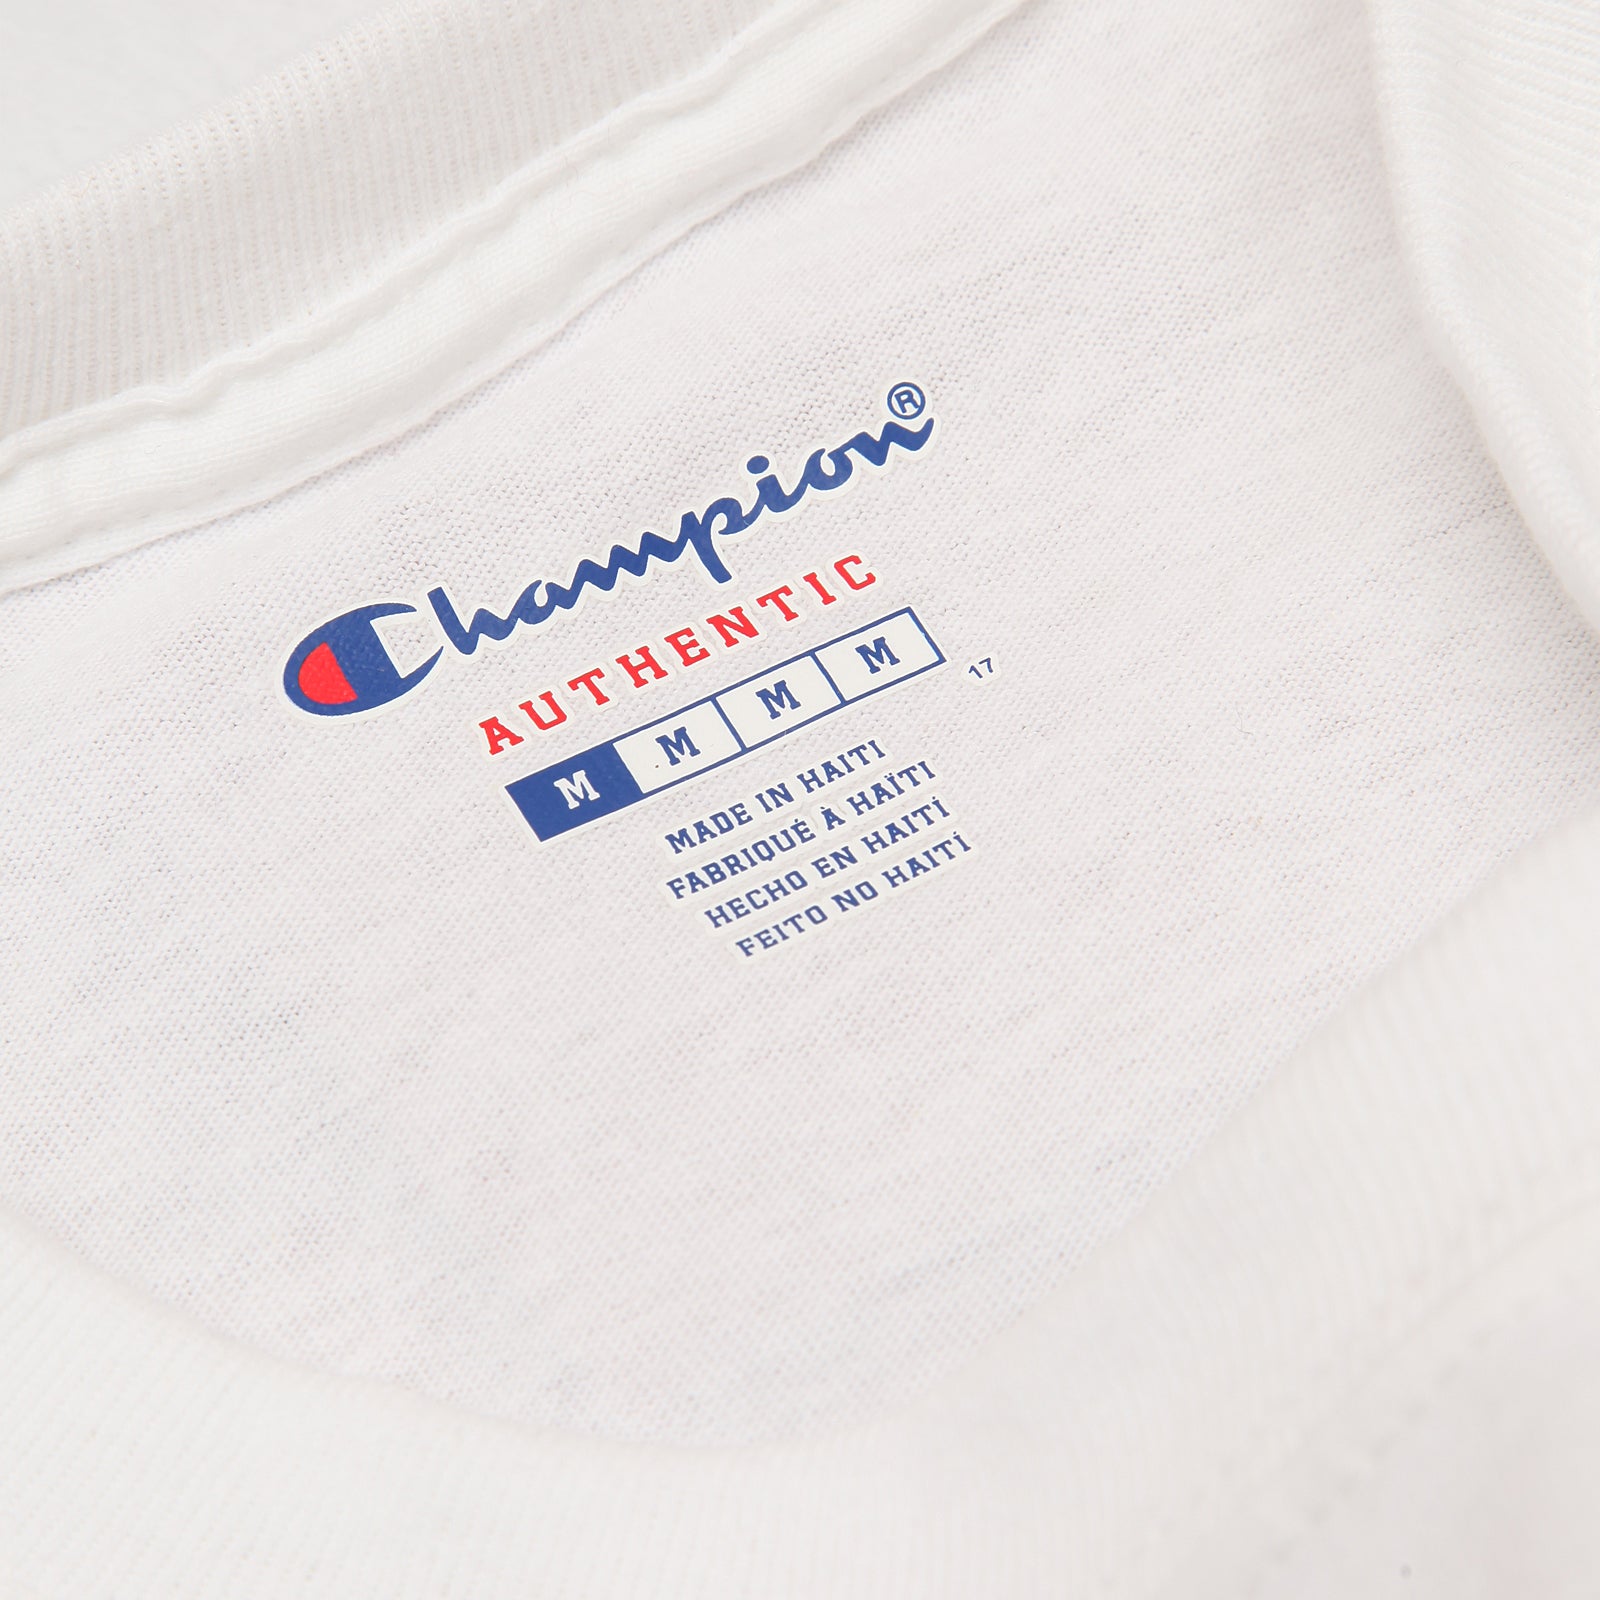 champion made in